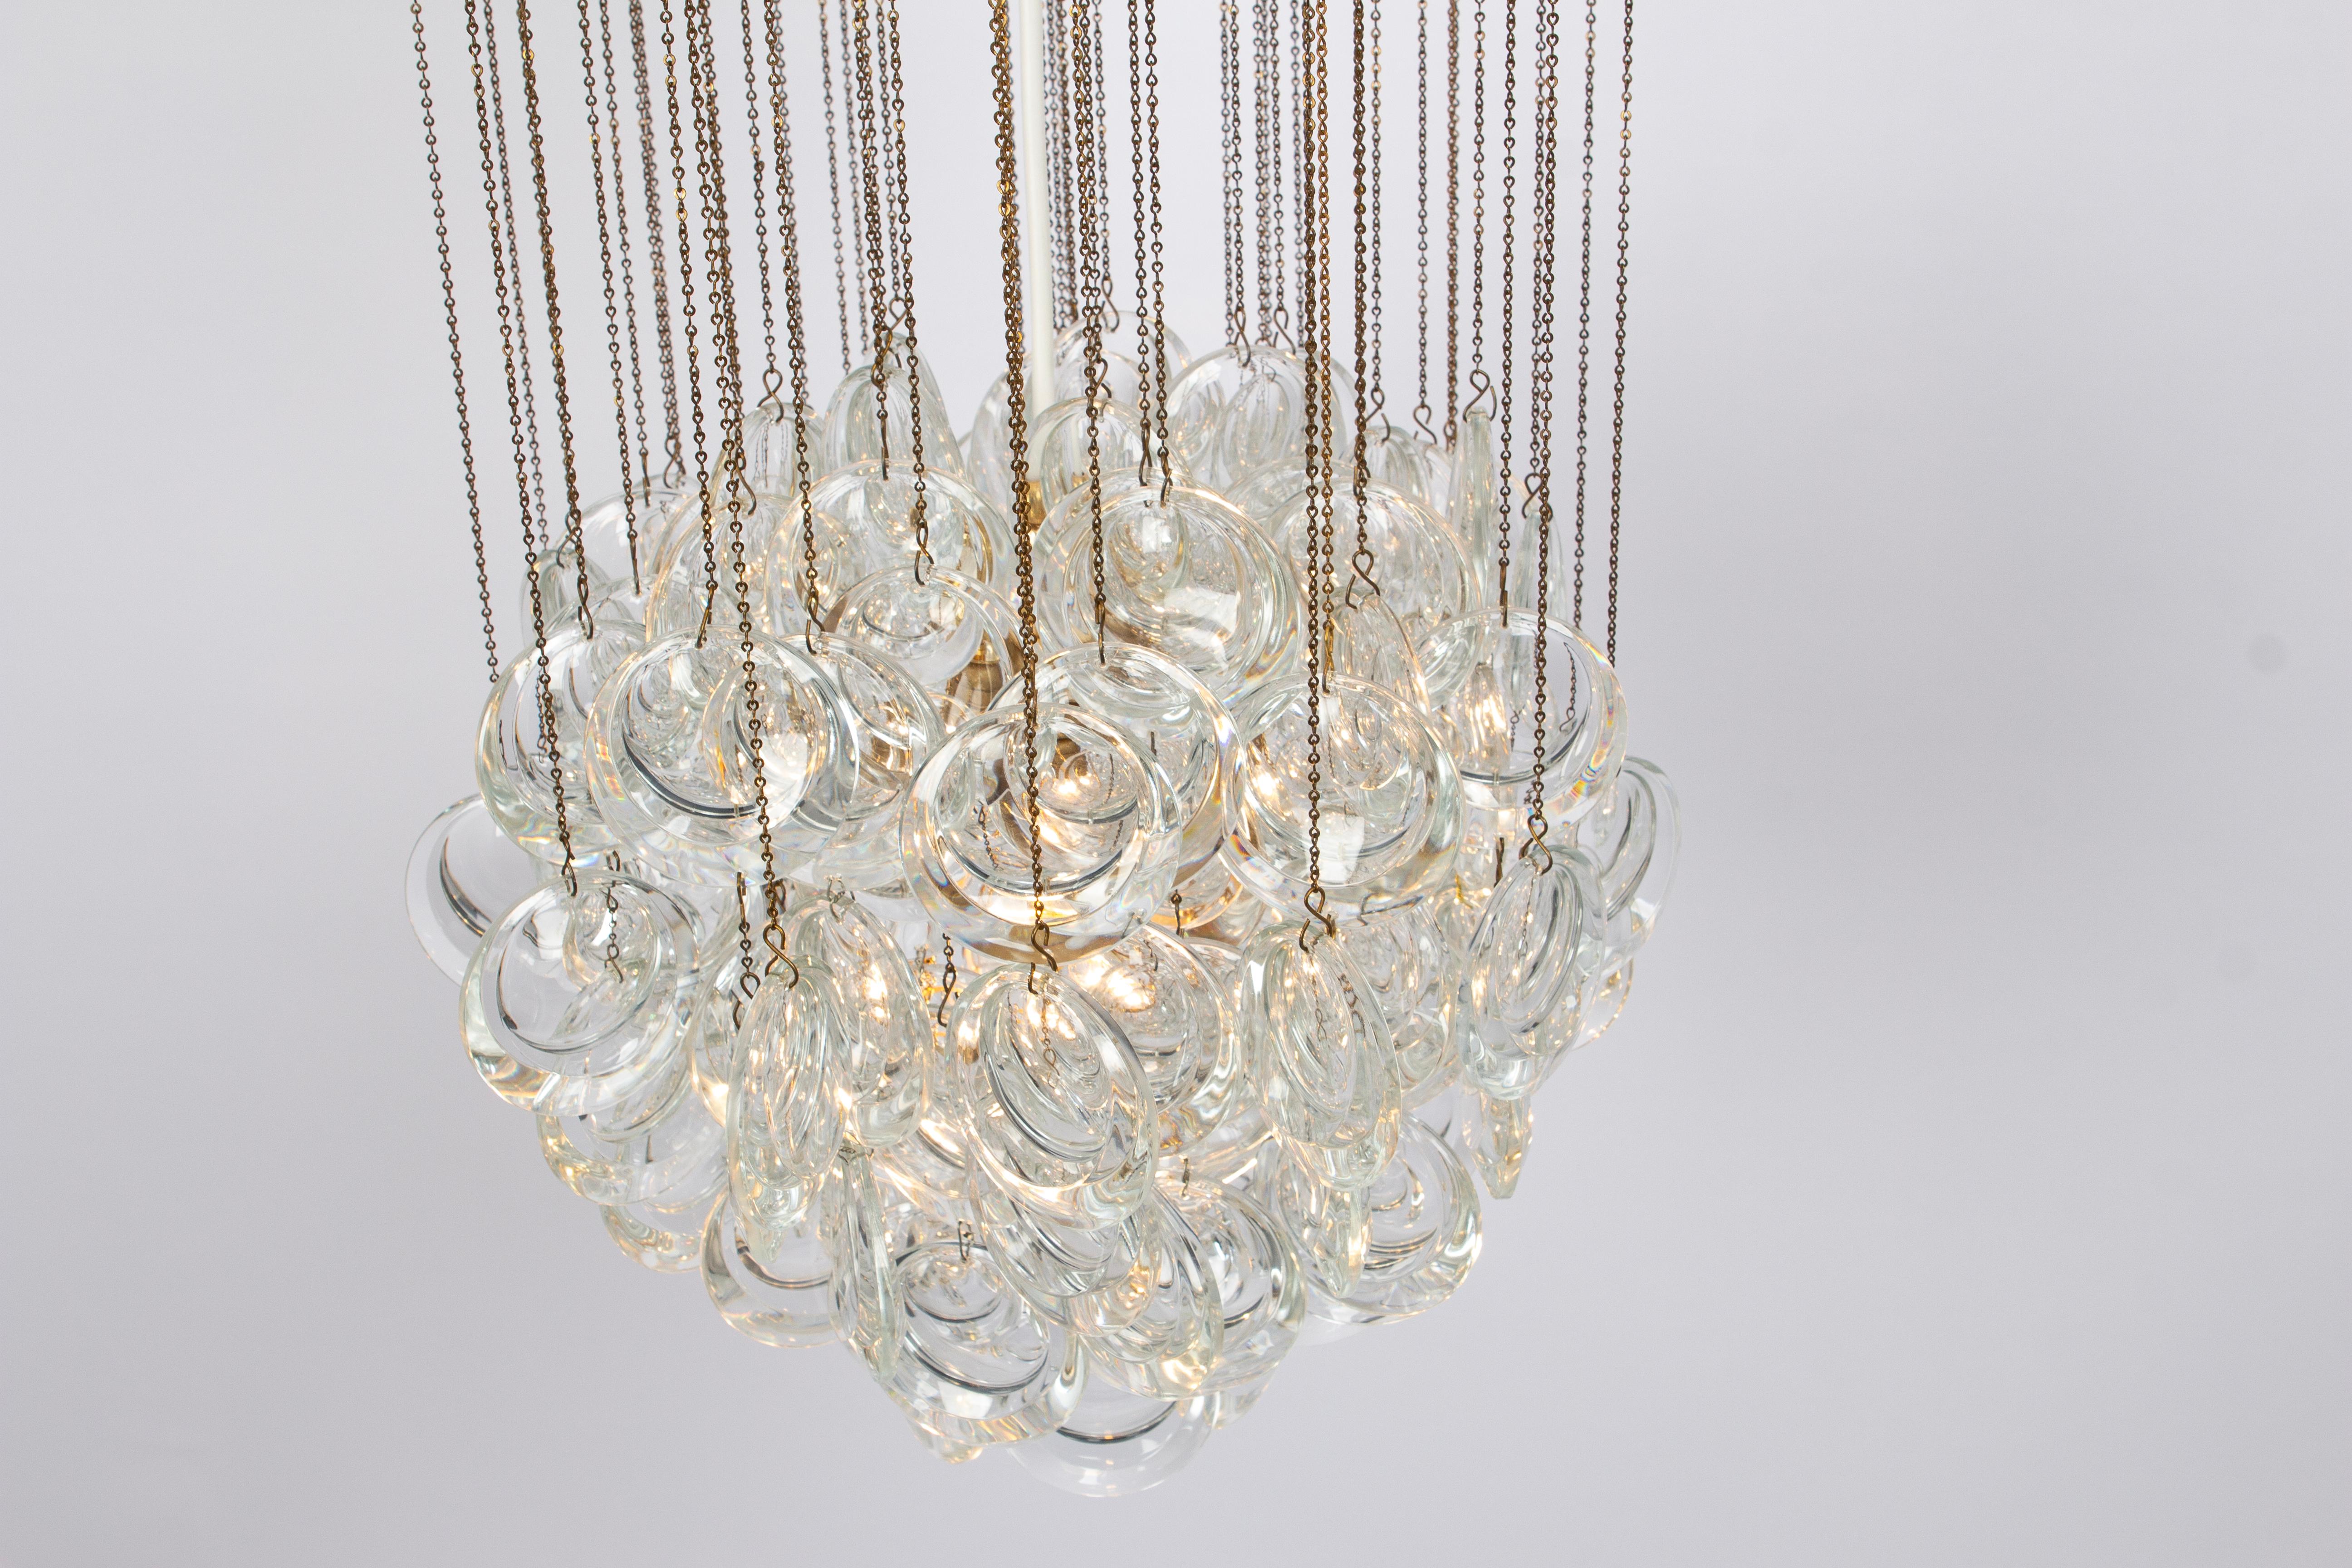 Delicate Gilt Brass Crystal Chandelier by Palwa, Sciolari Design, Germany, 1970s For Sale 2